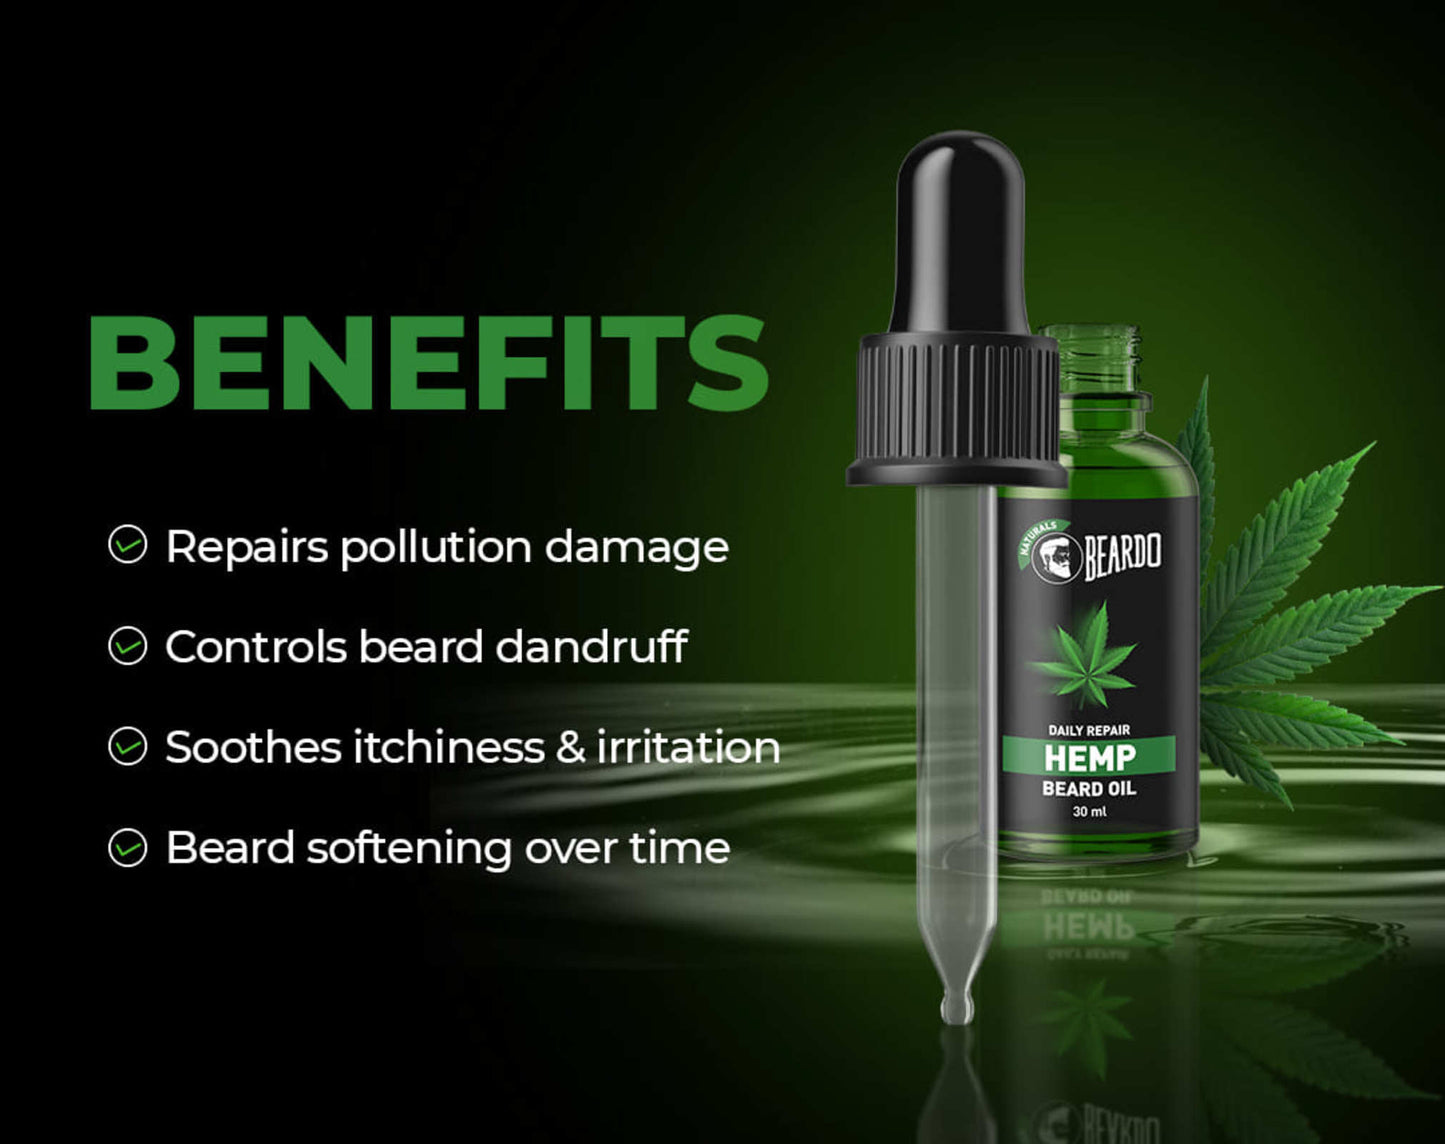 benefits of hemp oil, benefits of hemp oil for beard, benefits of hemp, control beard dandruff, soothes itchiness